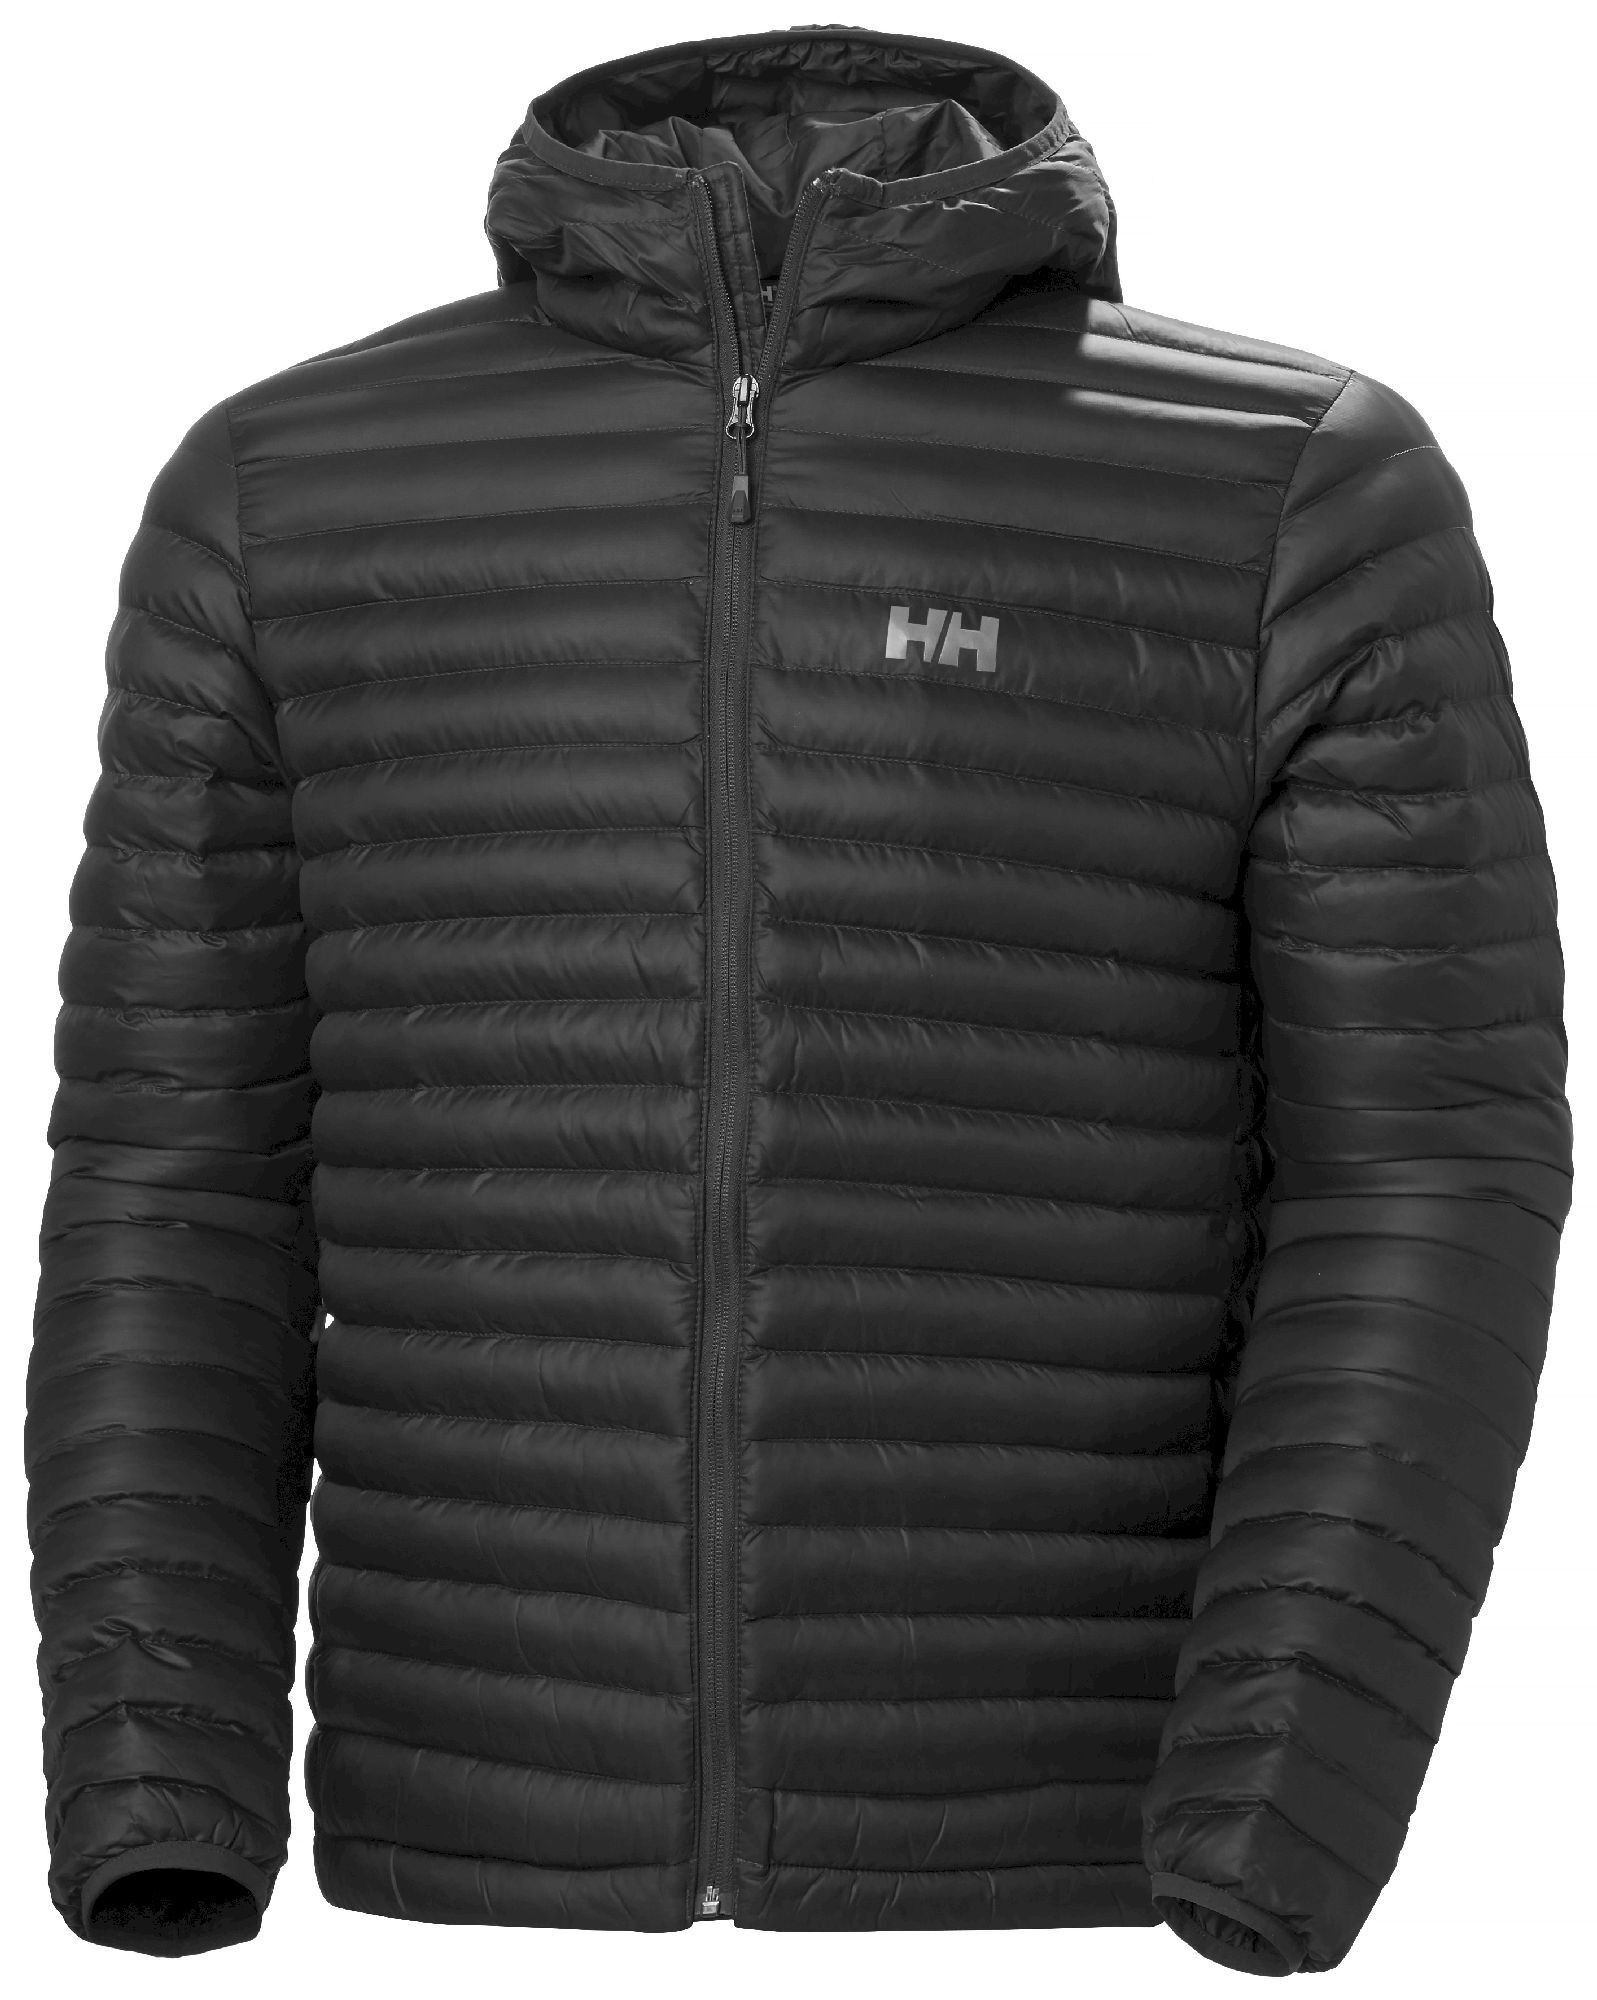 Helly Hansen Sirdal Hooded Insulated Jacket - Giacca sintetica - Uomo | Hardloop